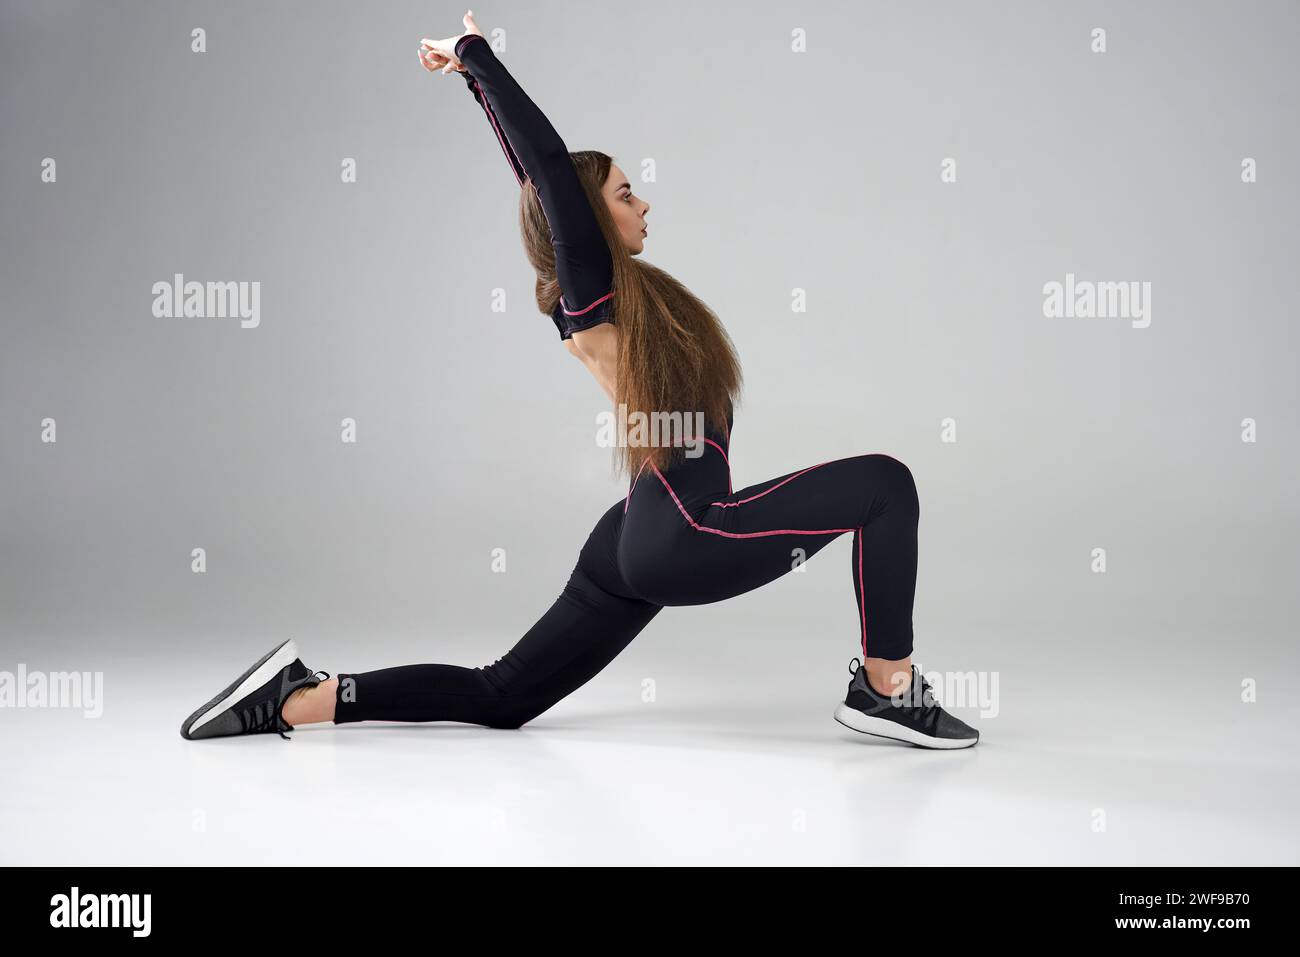 Healthy mind in a healthy body. Flexible cute little girl child looking at  camera while stretching her hands isolated on a grey background. Sport,  training, active lifestyle concept. Horizontal shot. Stock Photo